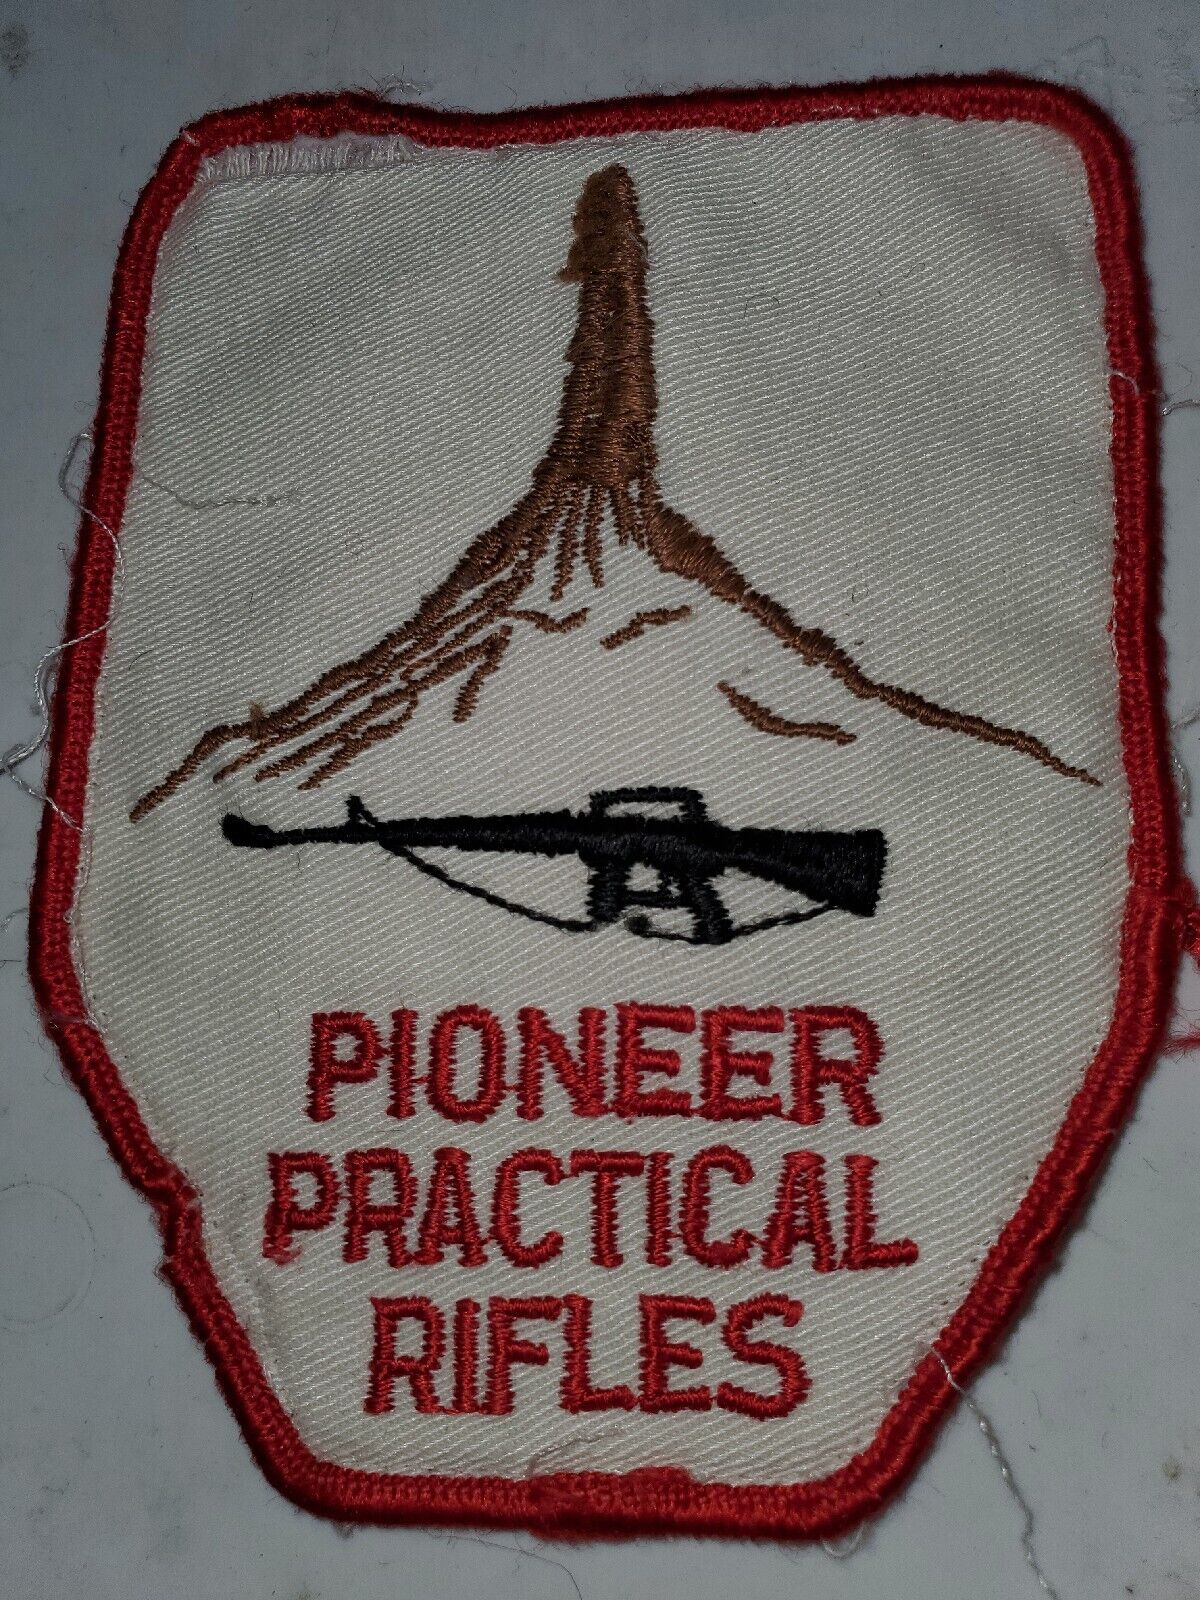 1960s 70s US Army Pioneer Rifles Training Camp Patch L@@K